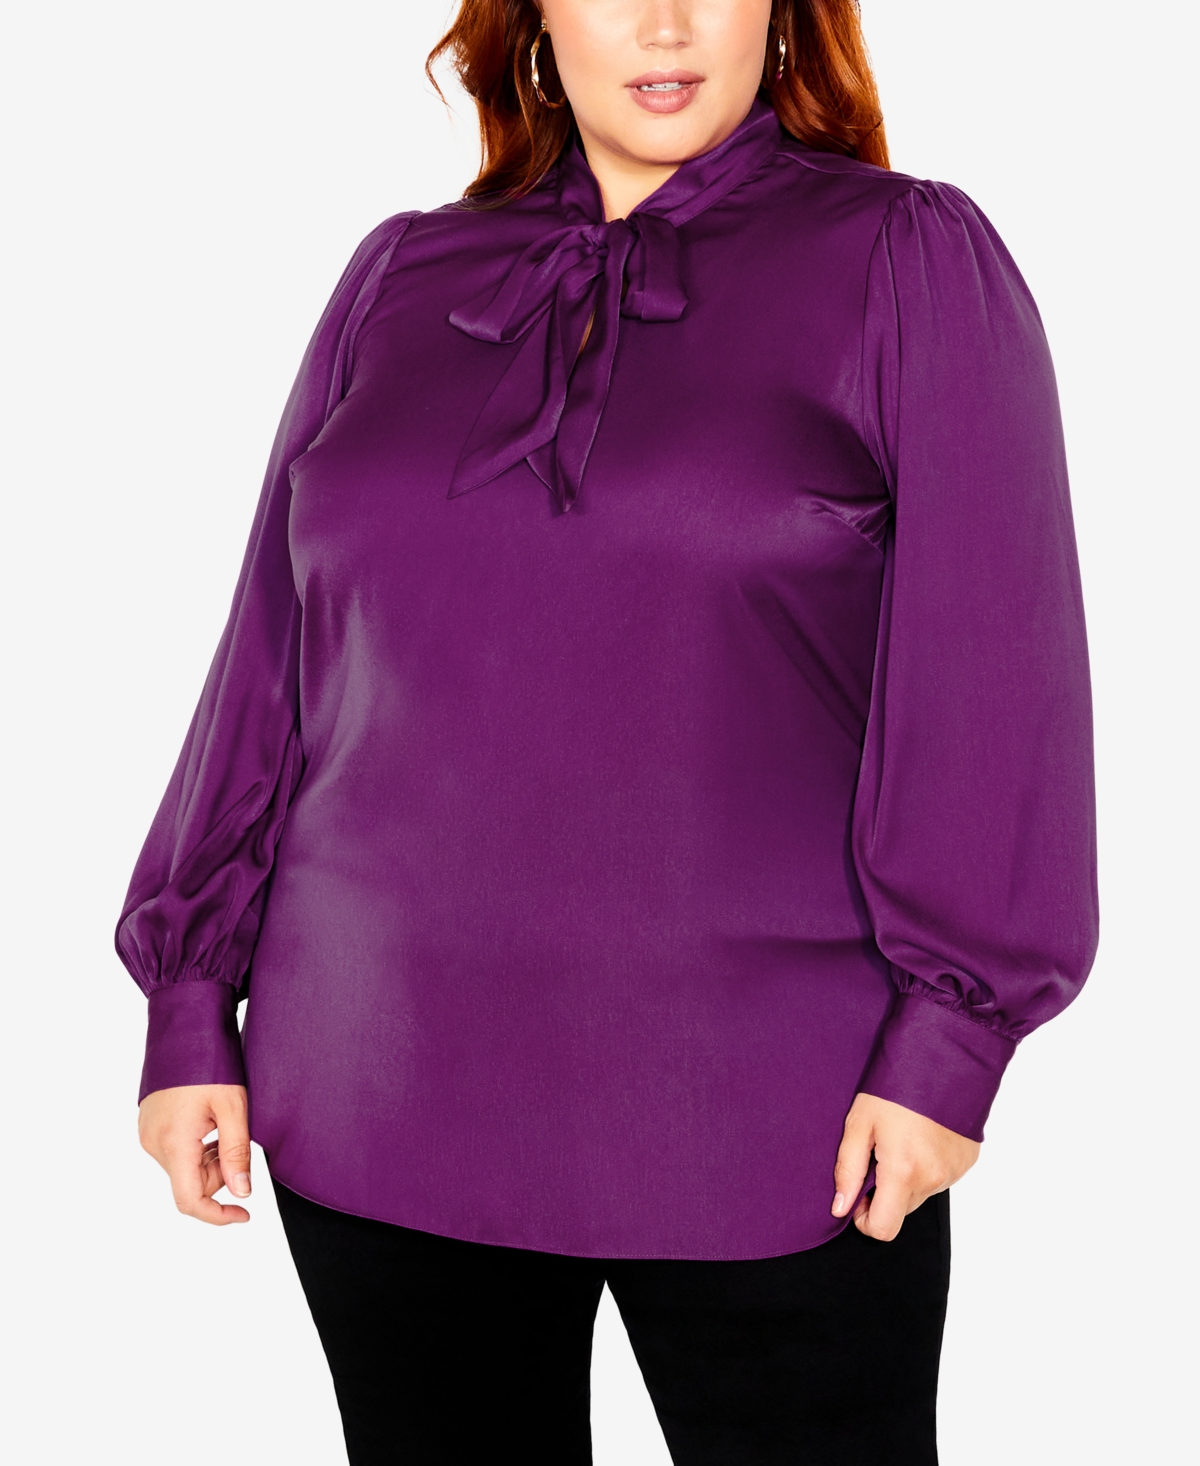 CITY CHIC TRENDY PLUS SIZE IN AWE PUFF SLEEVE TOP